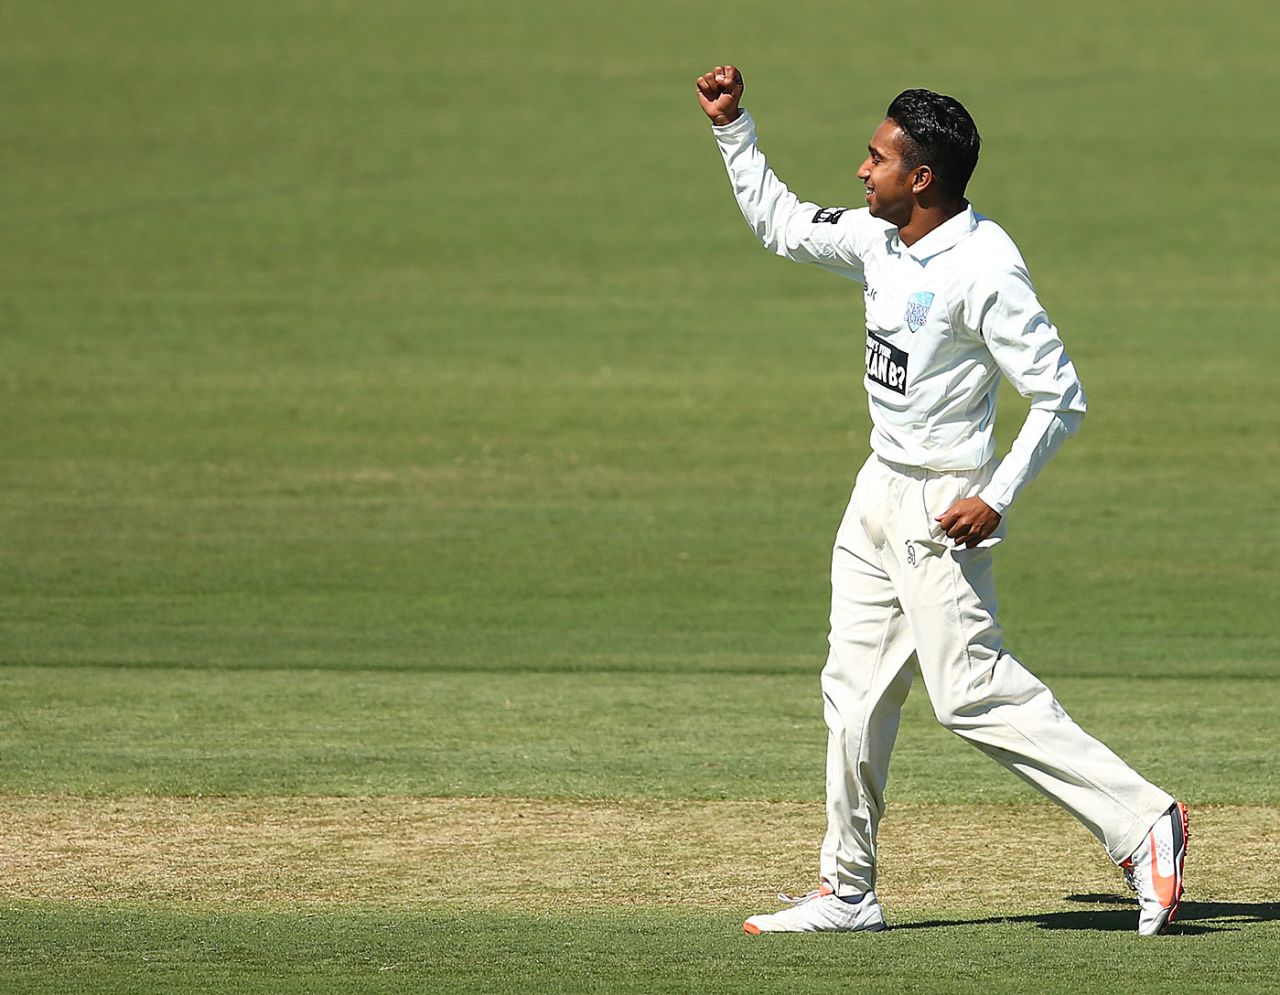 Arjun Nair celebrates a wicket, New South Wales v South Australia, Sheffield Shield 2015-16, 1st day, Coff's Harbour, February 25, 2016